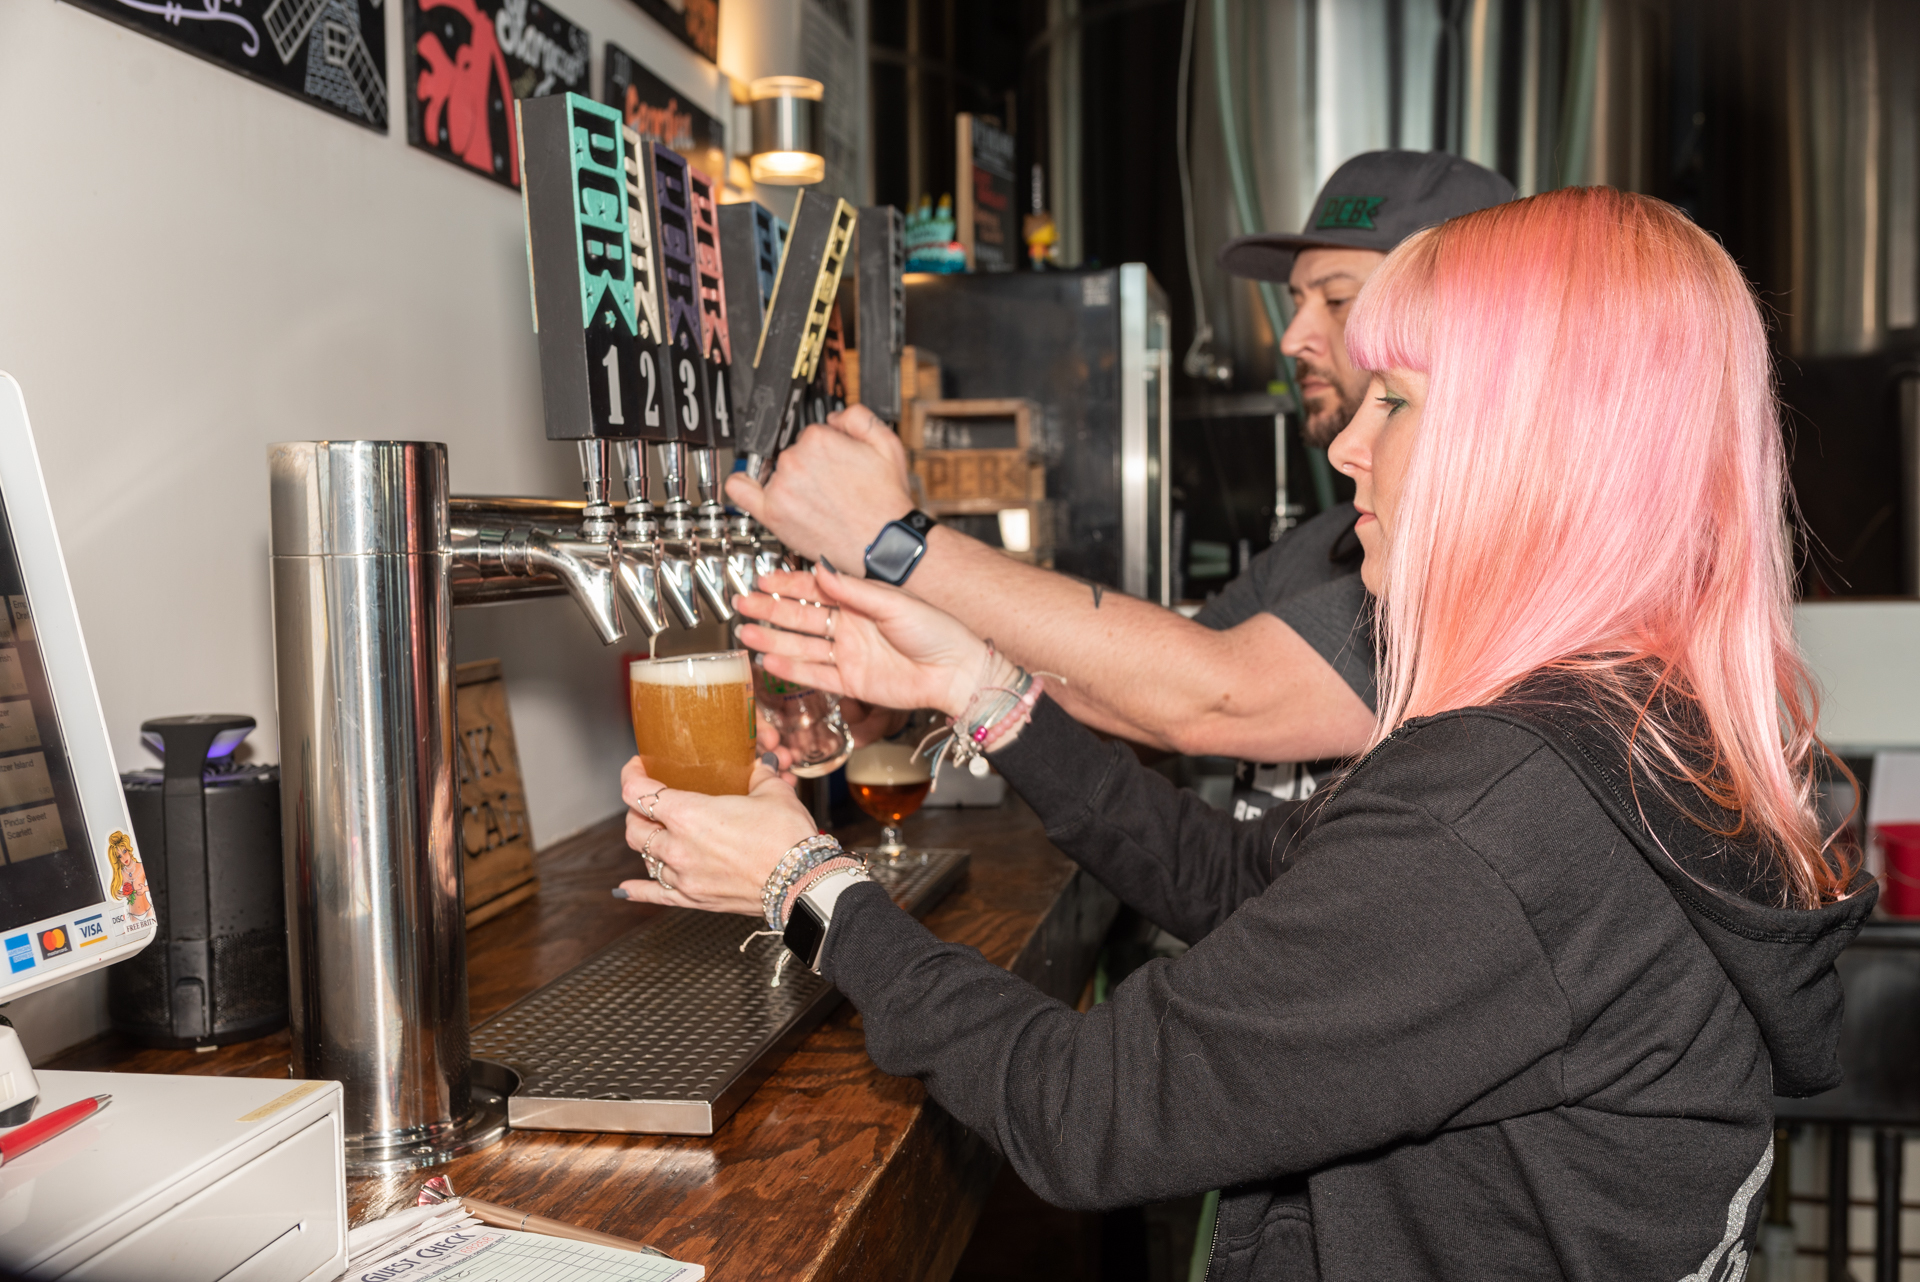 Tapping Into A New Trend: Breweries Are Popping Up Everywhere